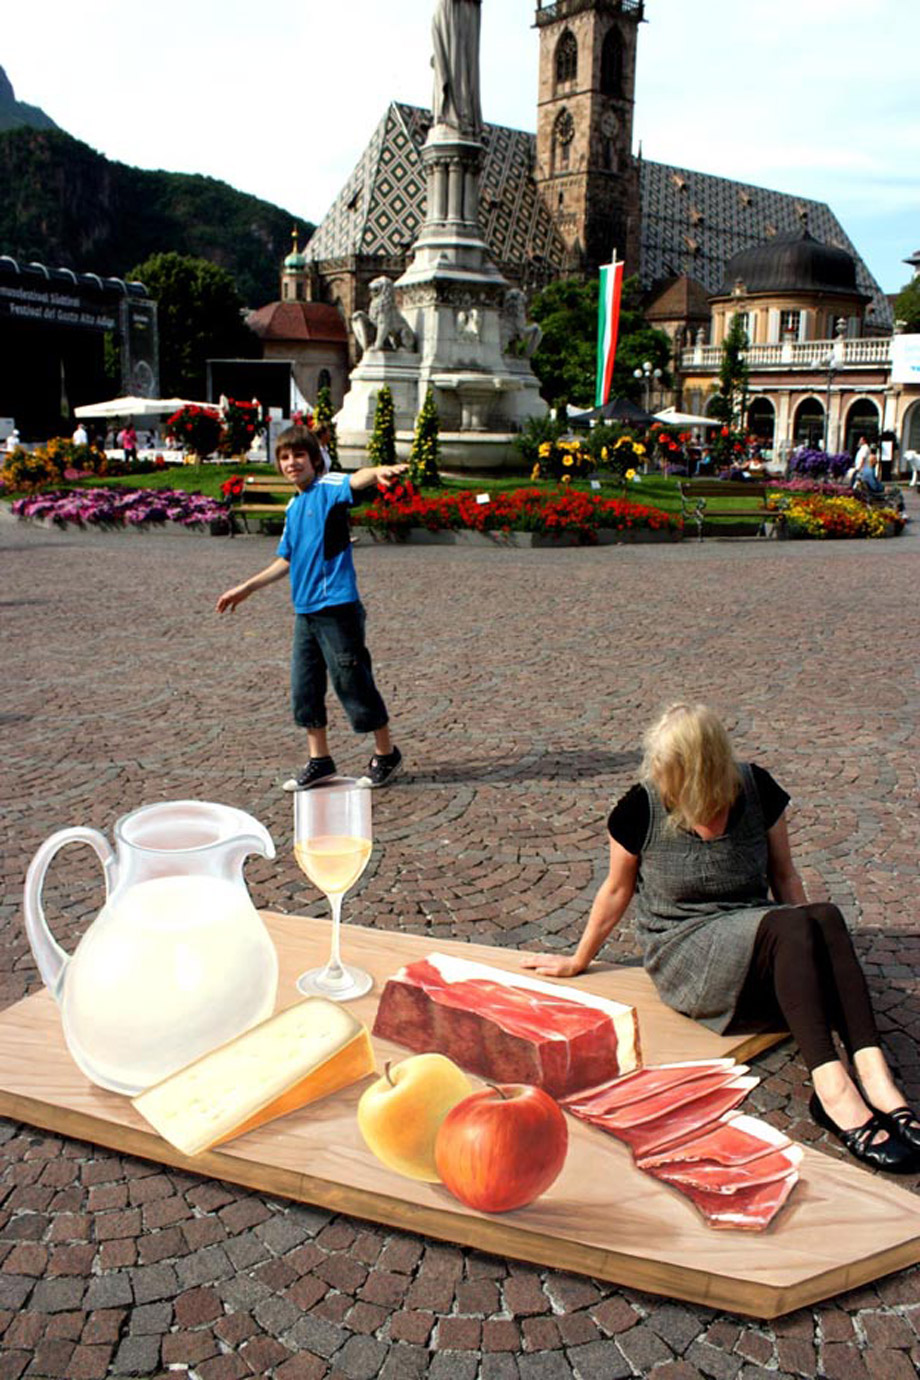 Interactive 3D street painting at a gourmet festival